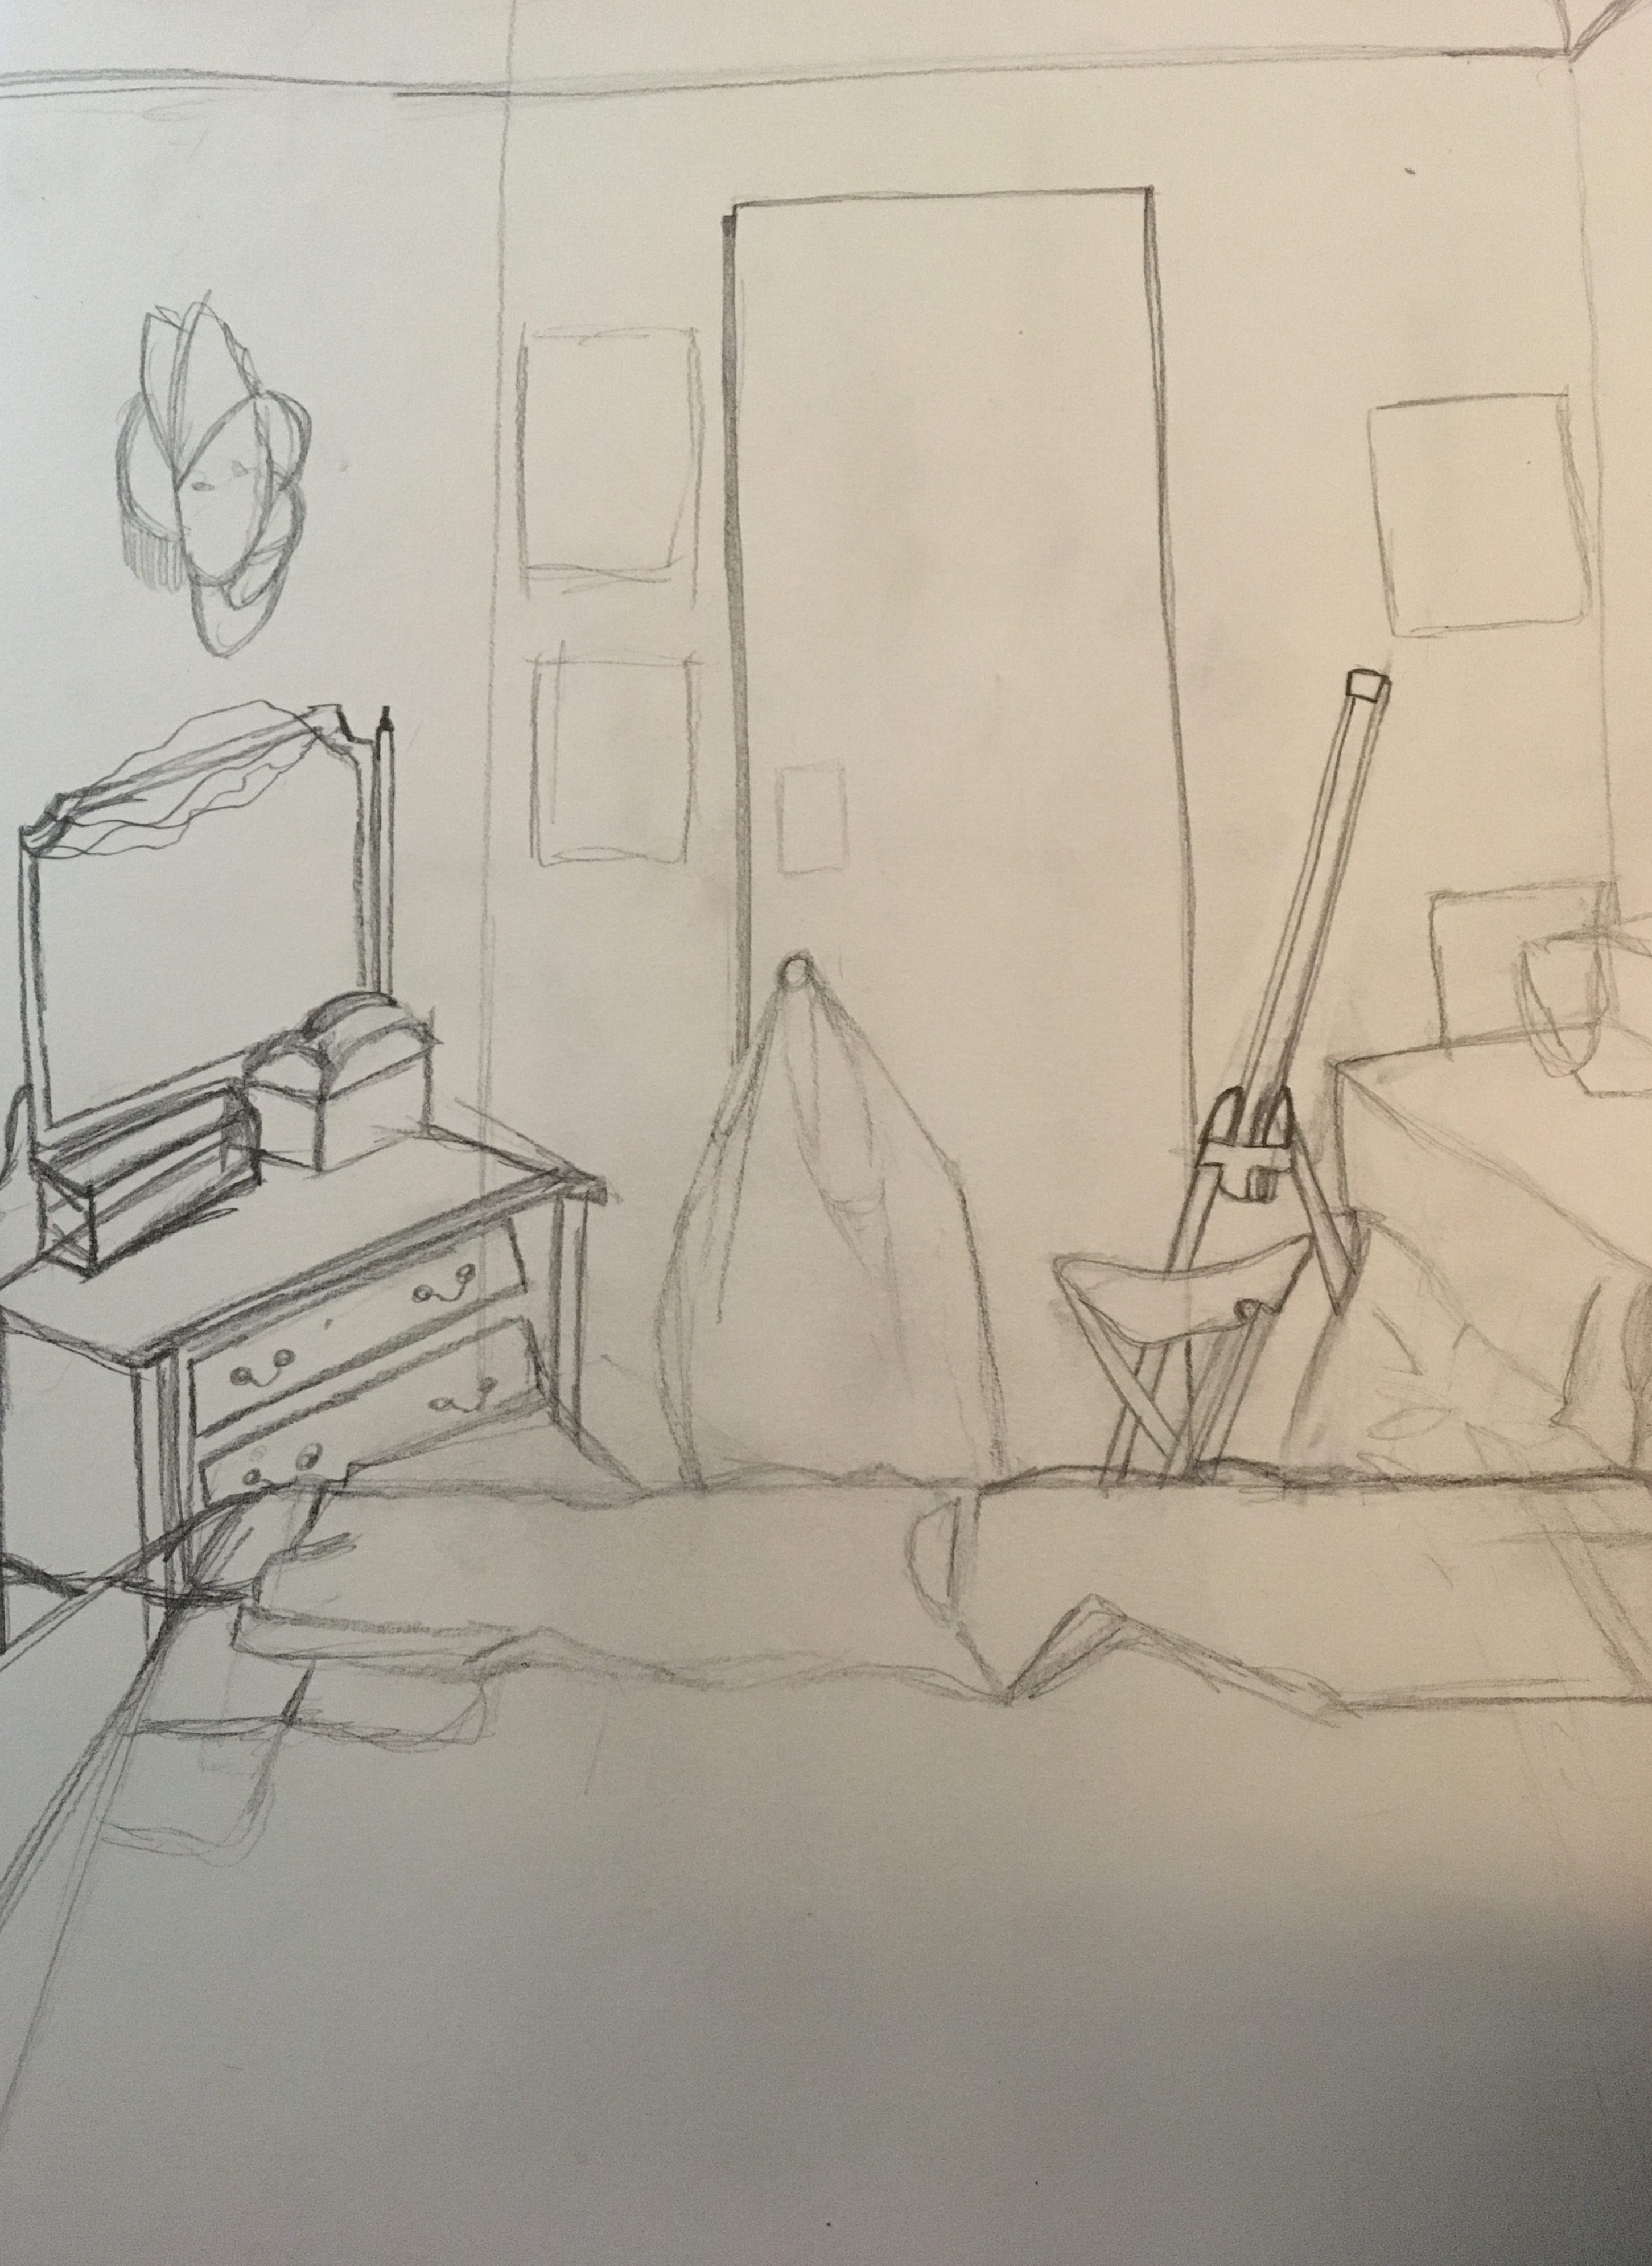 Week 2- Draw your bed and space around it, view from window